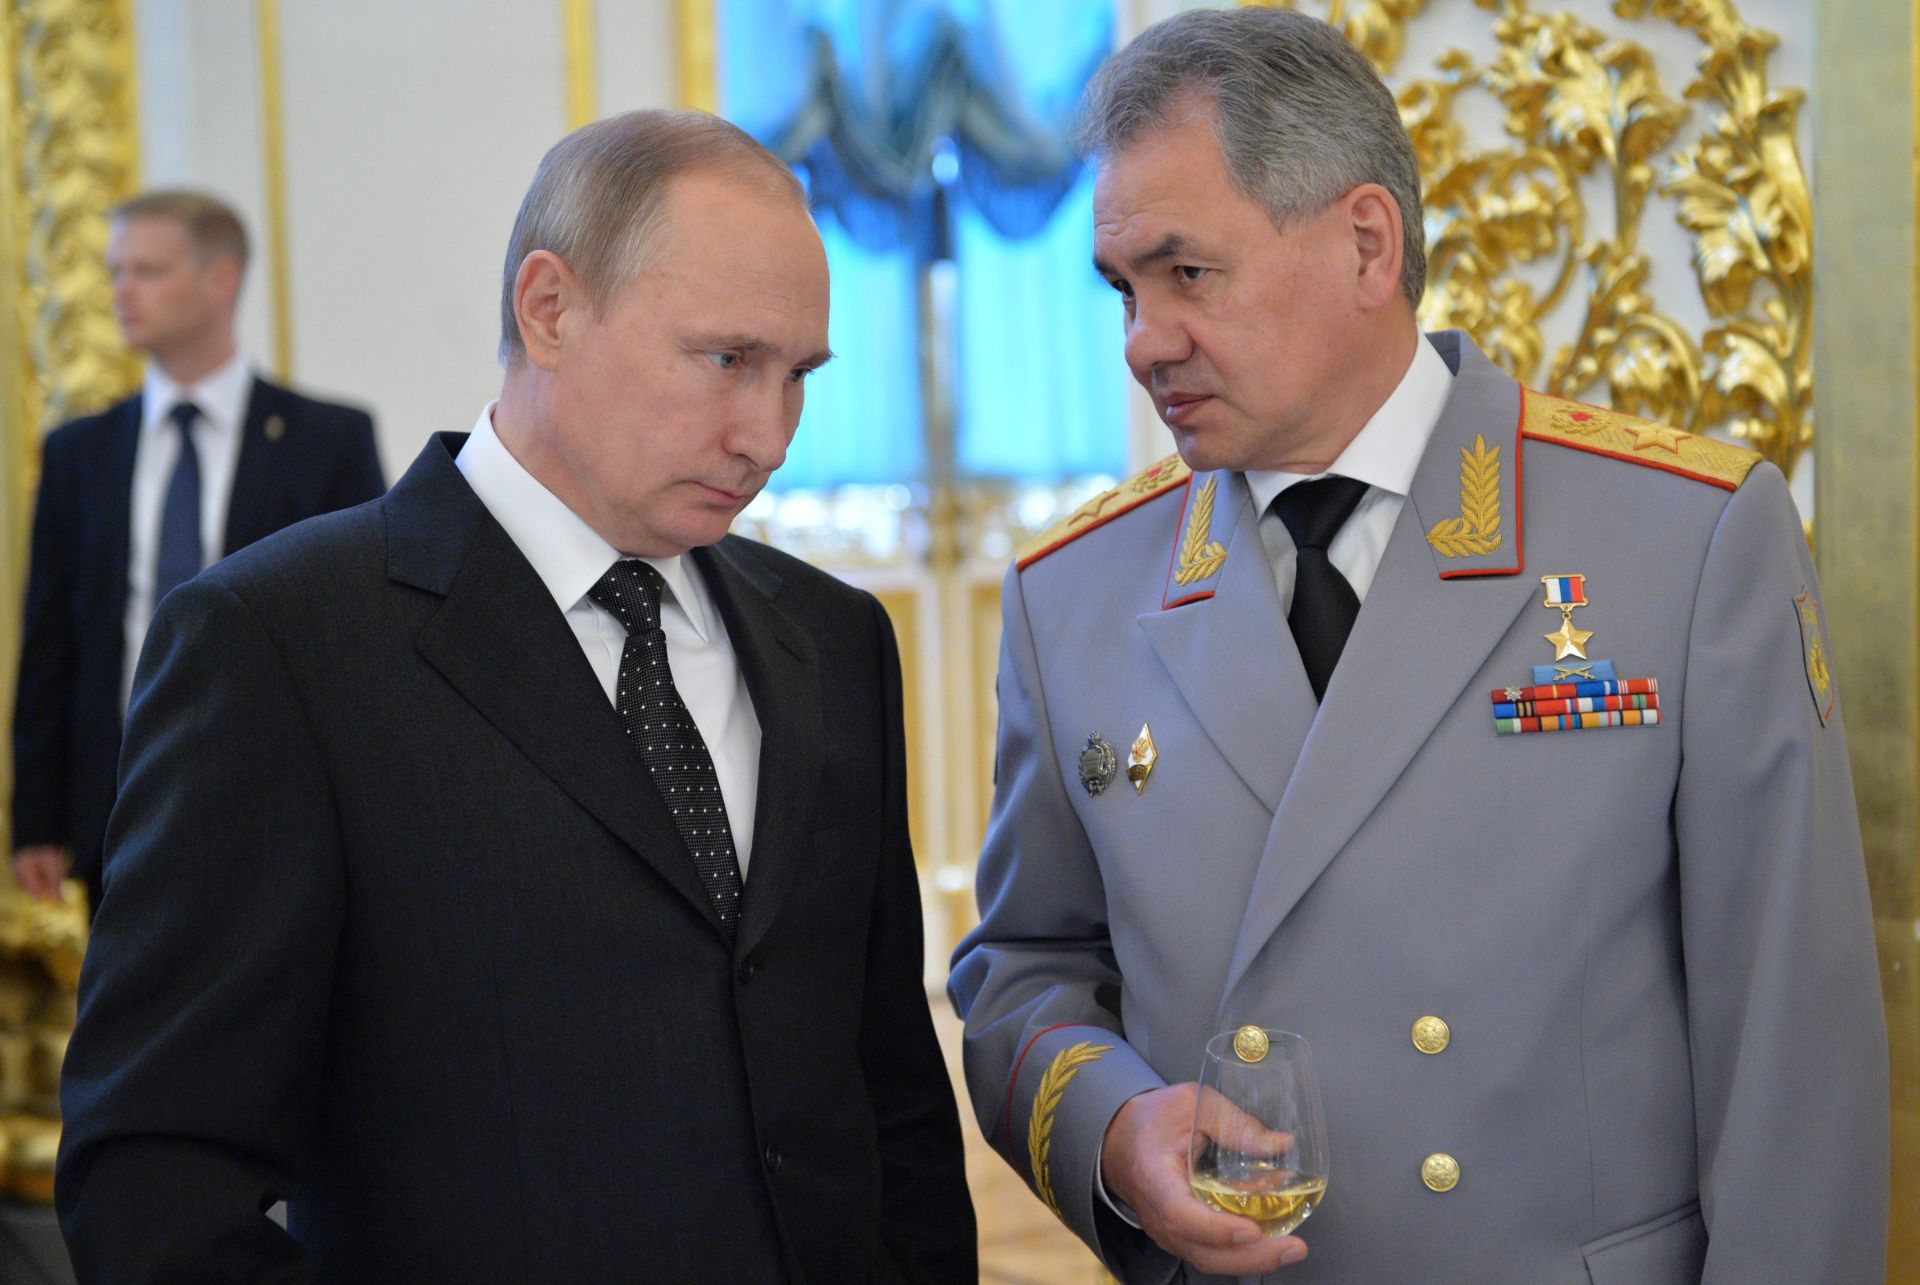 epa05396205 Russian President Vladimir Putin (L) and Defense Minister Sergey Shoygu (R) attend a meeting with graduates of military colleges at Kremlin in Moscow, Russia 28 June 2016.  EPA/ALEXEI DRUZHININ/ POOL MANDATORY CREDIT